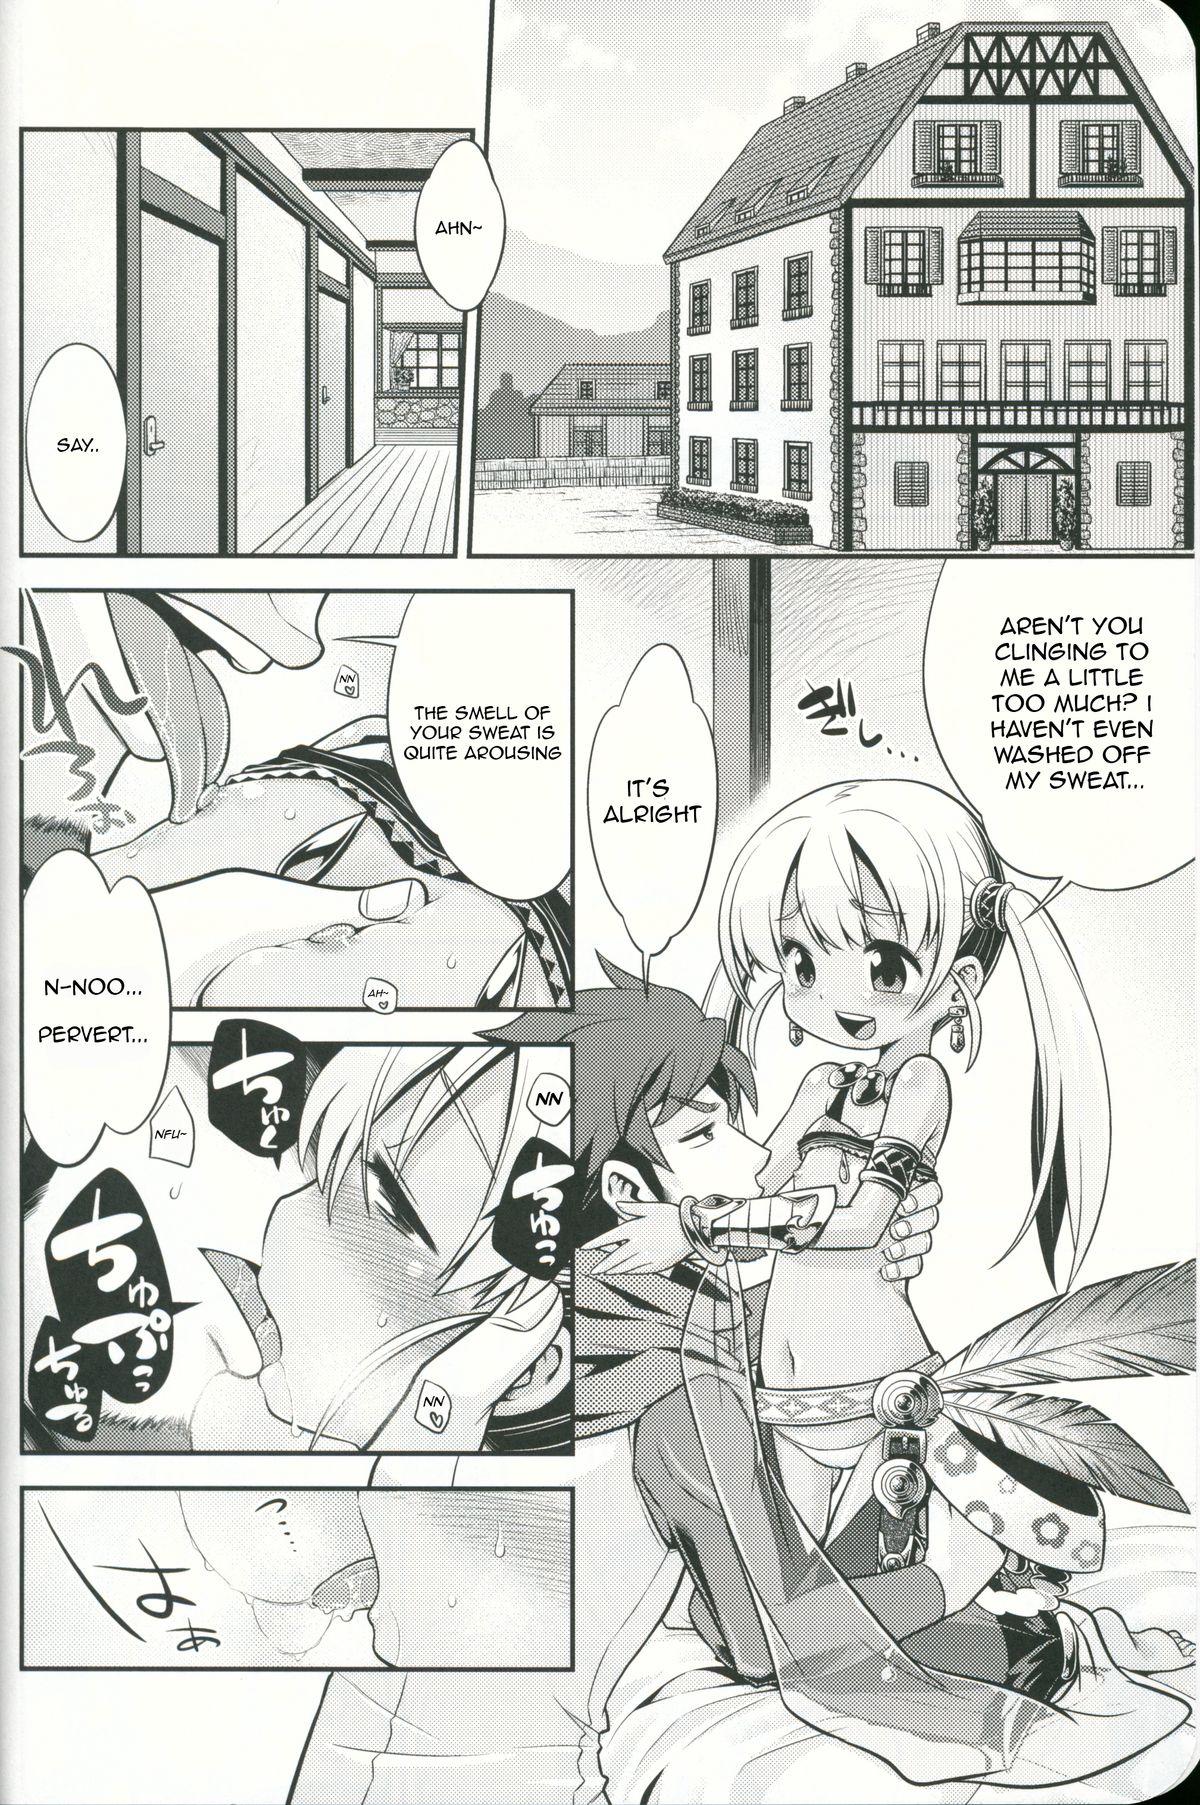 Sex Party Sekaiju no Anone 21 - Etrian odyssey Gay Amateur - Page 3